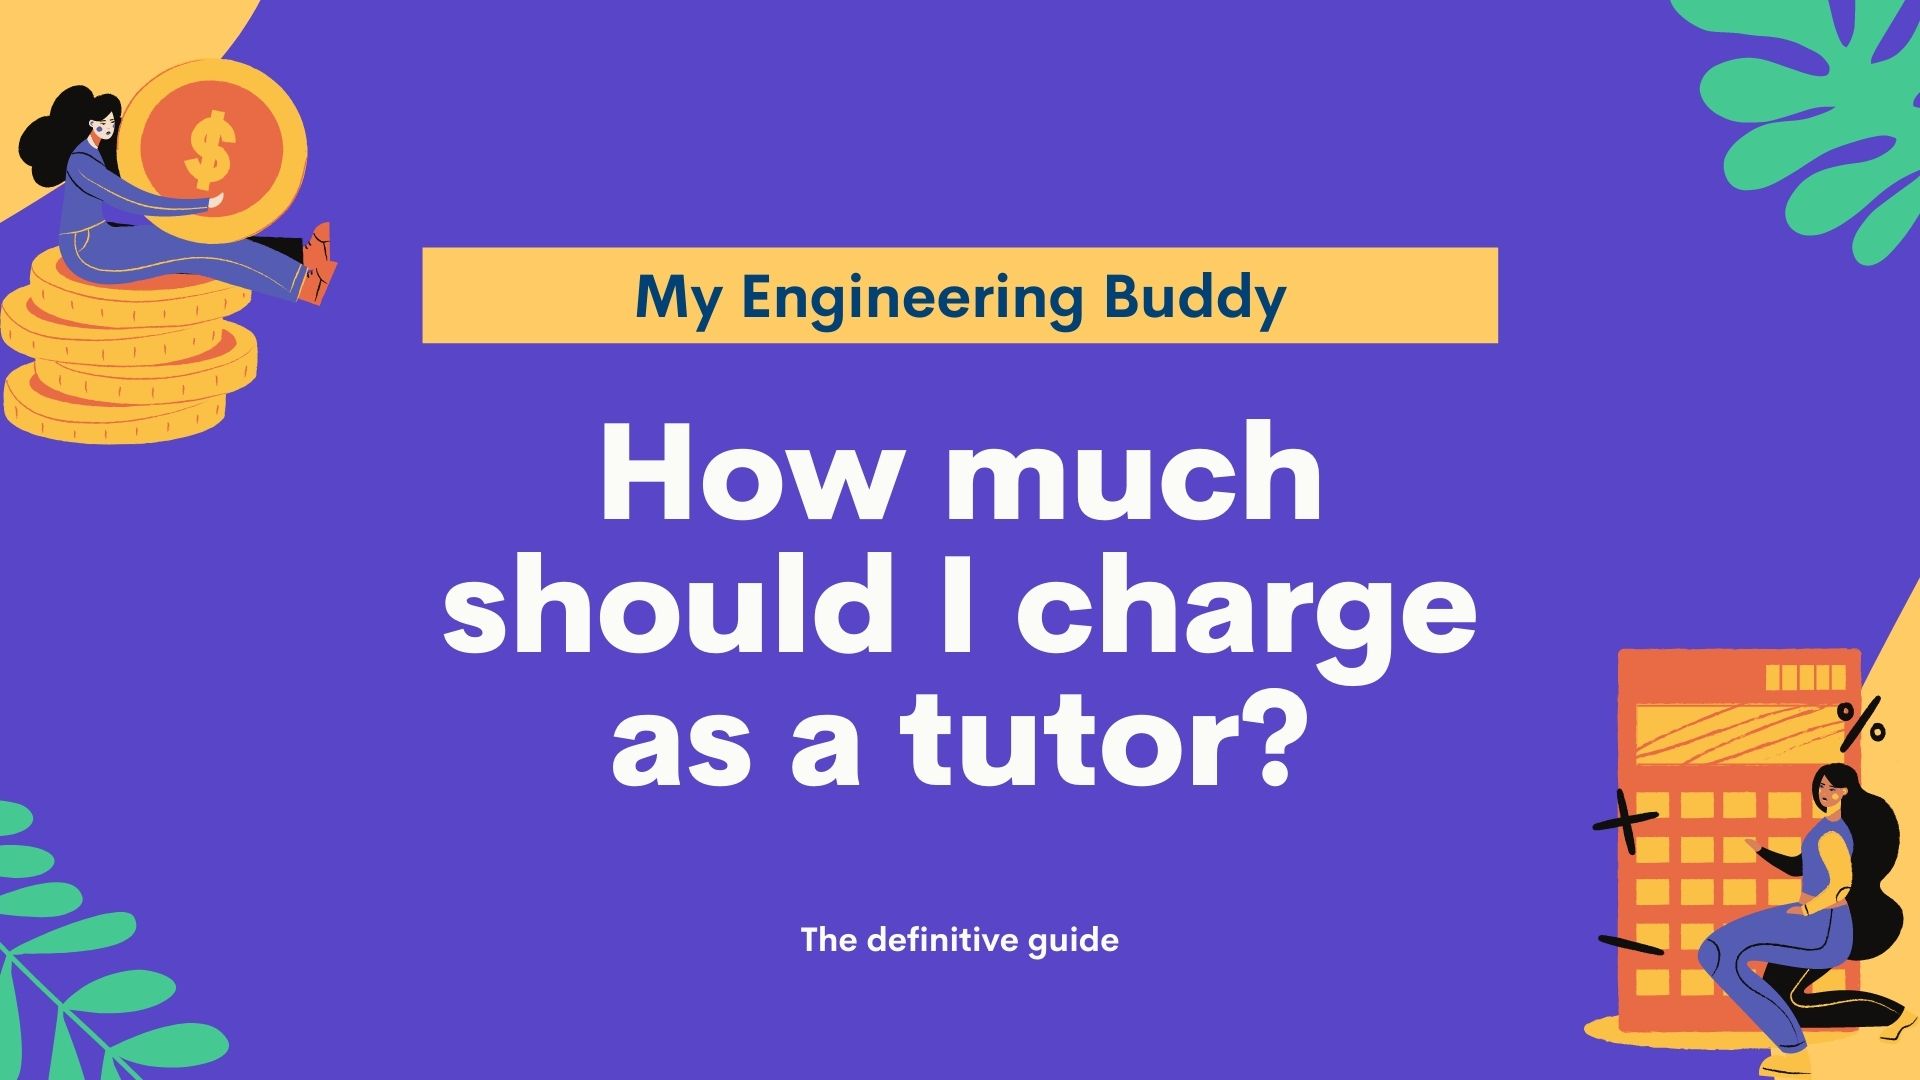 How much should I charge as a tutor (in 2022)? www.myengineeringbuddy.com